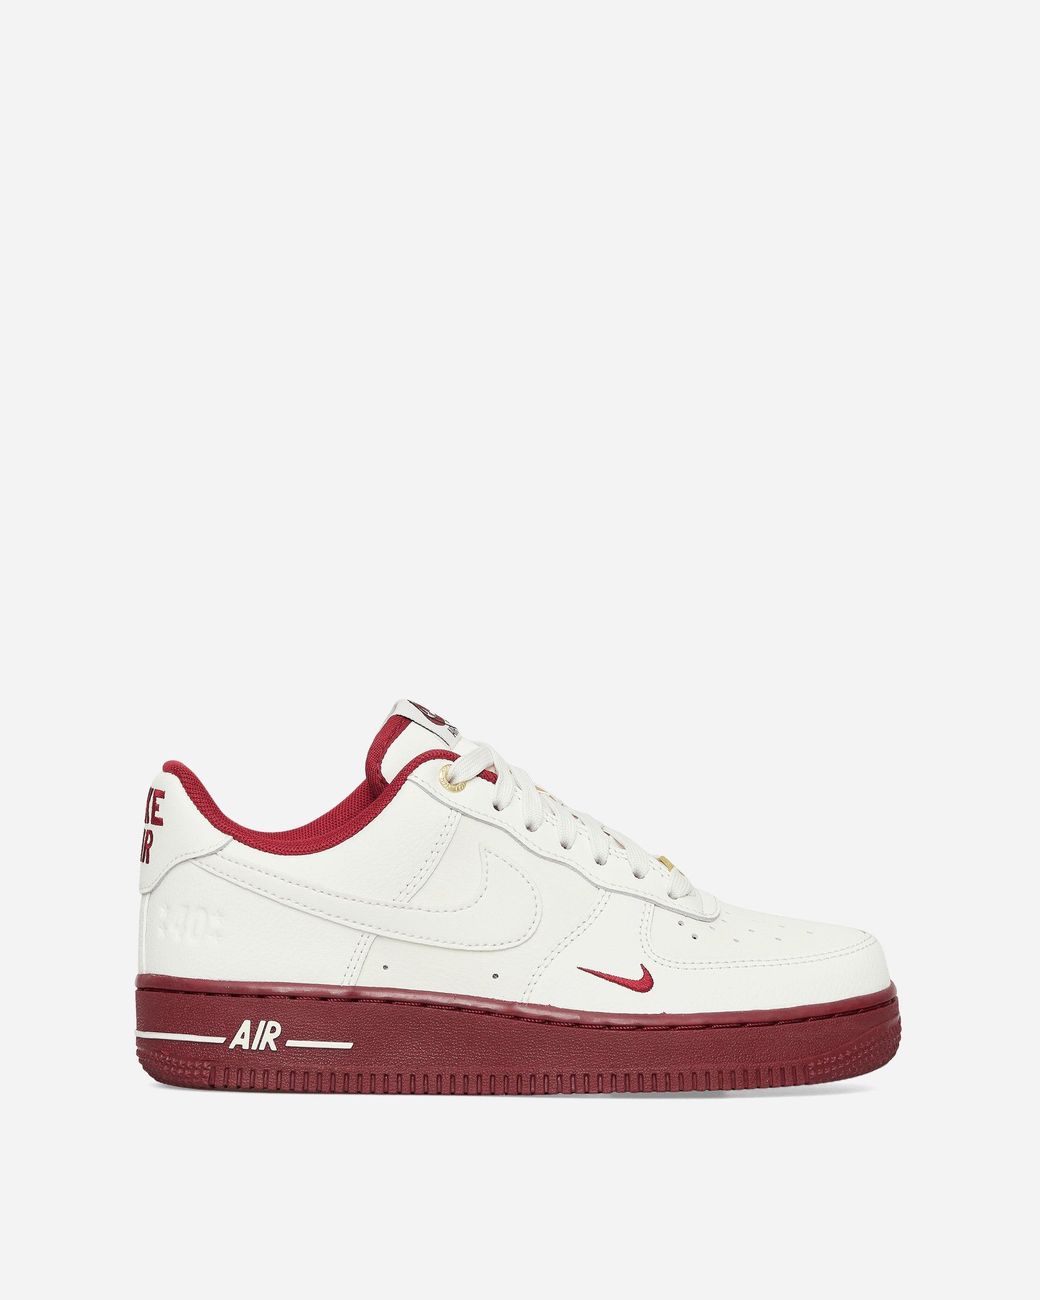 Nike Wmns Air Force 1 '07 Se Sneakers Sail / Team Red in White | Lyst